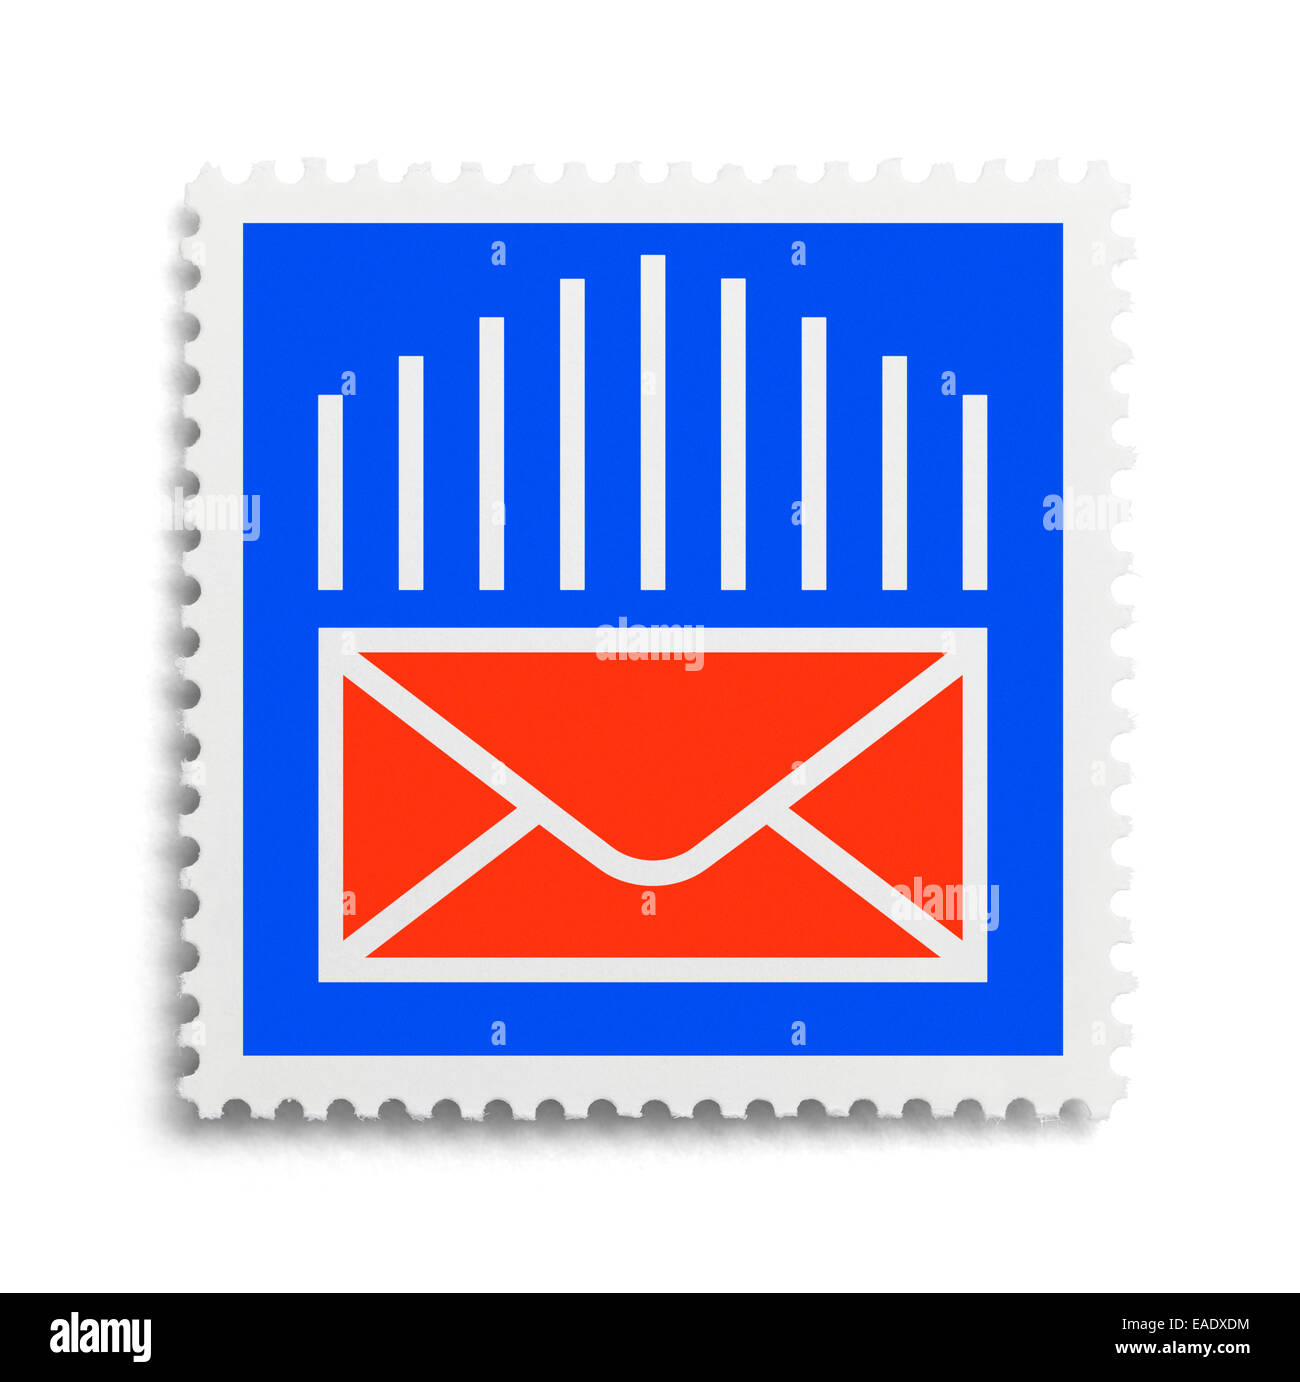 Red and Blue Envelope Stamp Isolated on White Background. Stock Photo